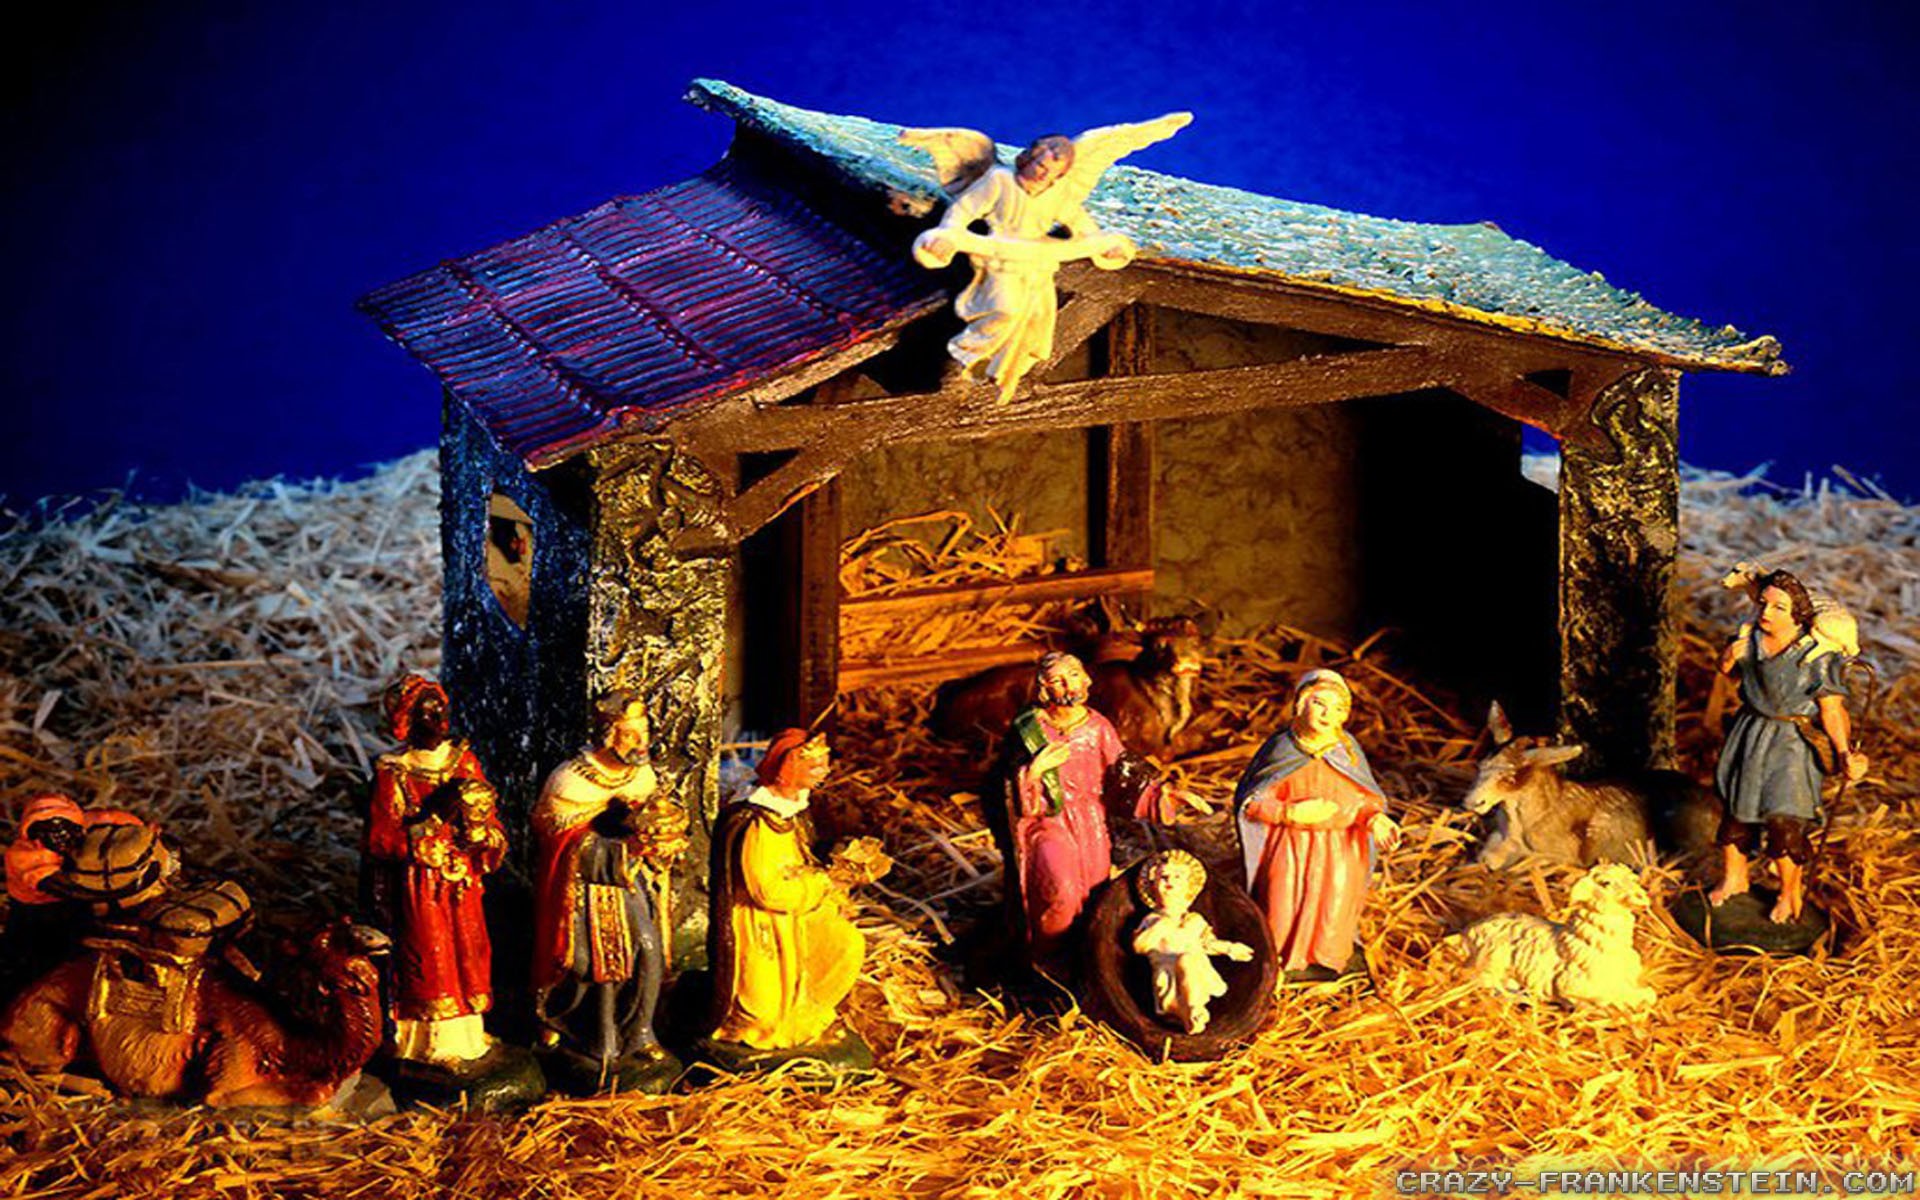 nativity scene pictures free download